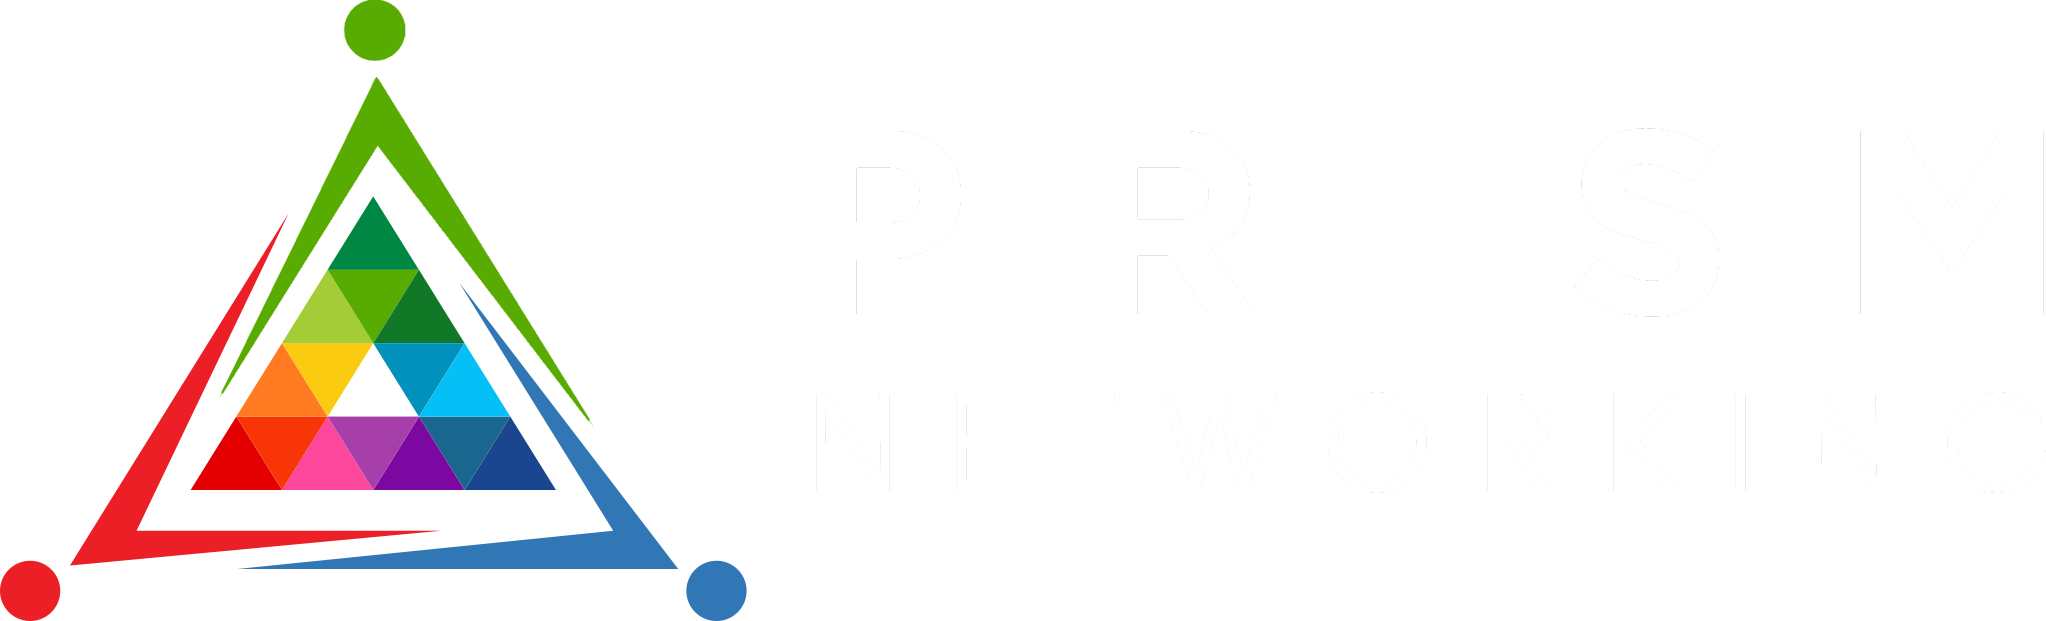 PRISM Networking